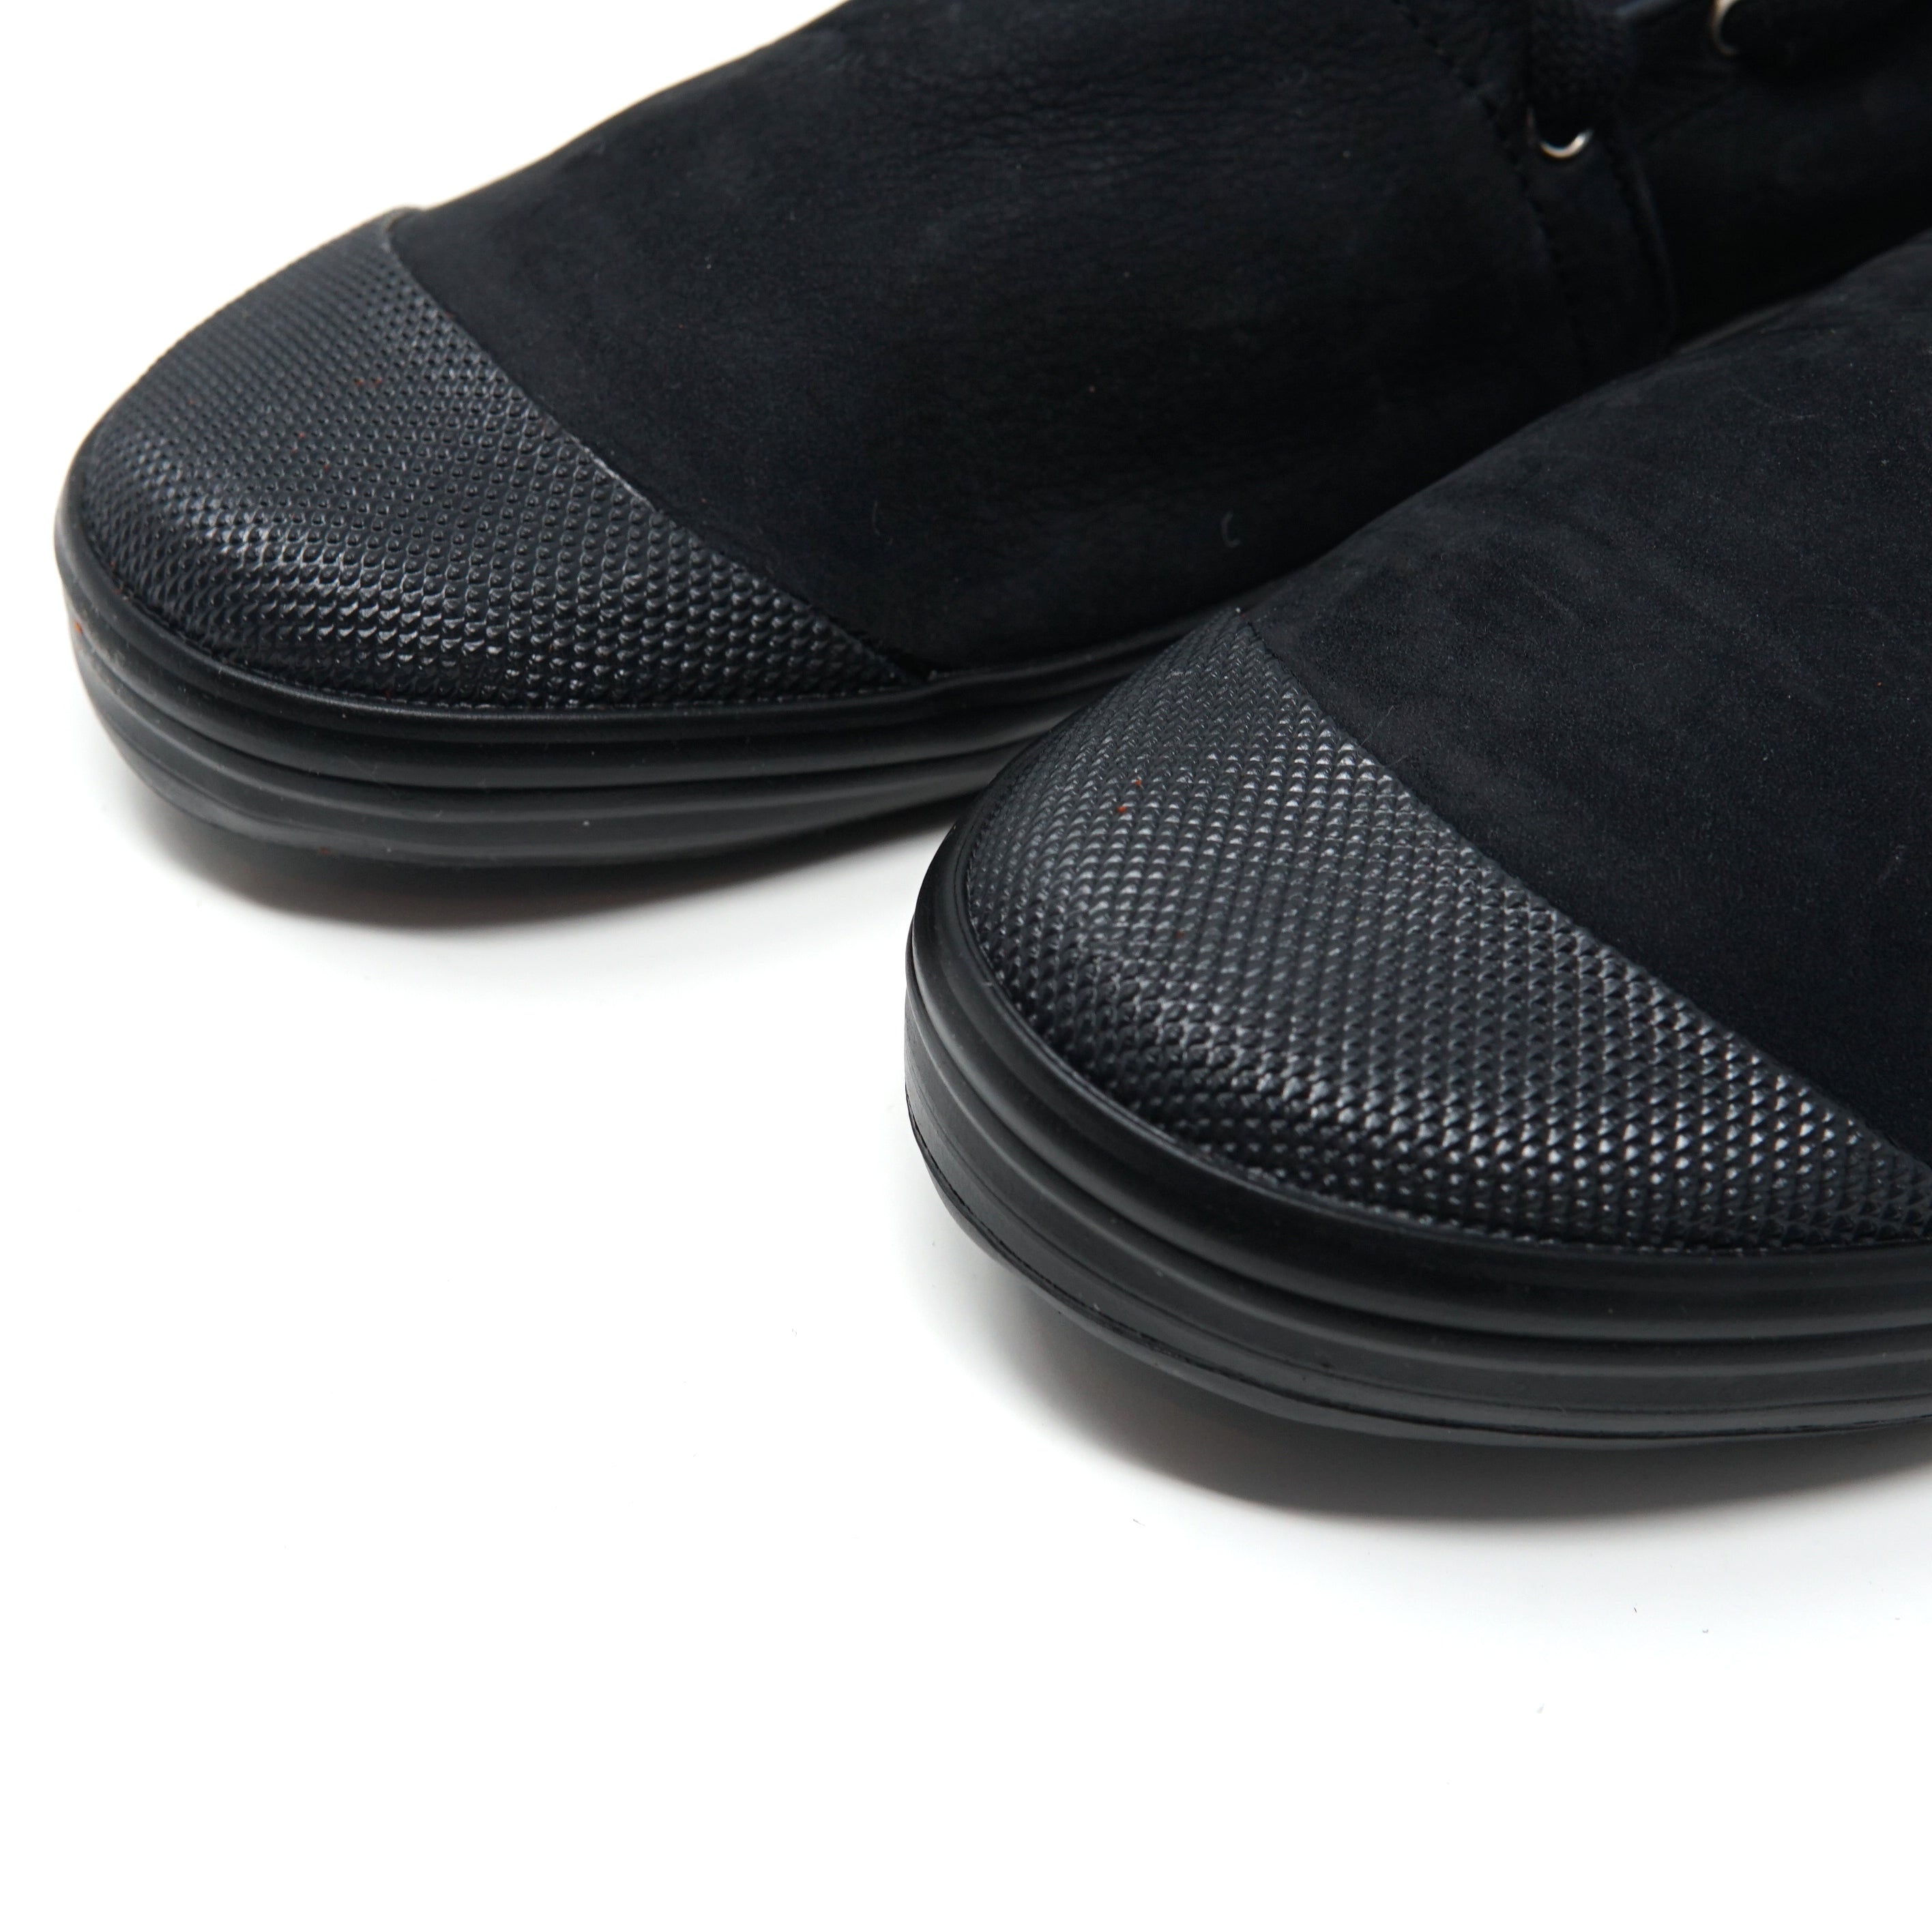 No:4033NL | Name:FRENCH MILITARY ESPADRILLES | Color:Black Nuback【REPRODUCTION OF FOUND】-REPRODUCTION OF FOUND-ADDICTION FUKUOKA